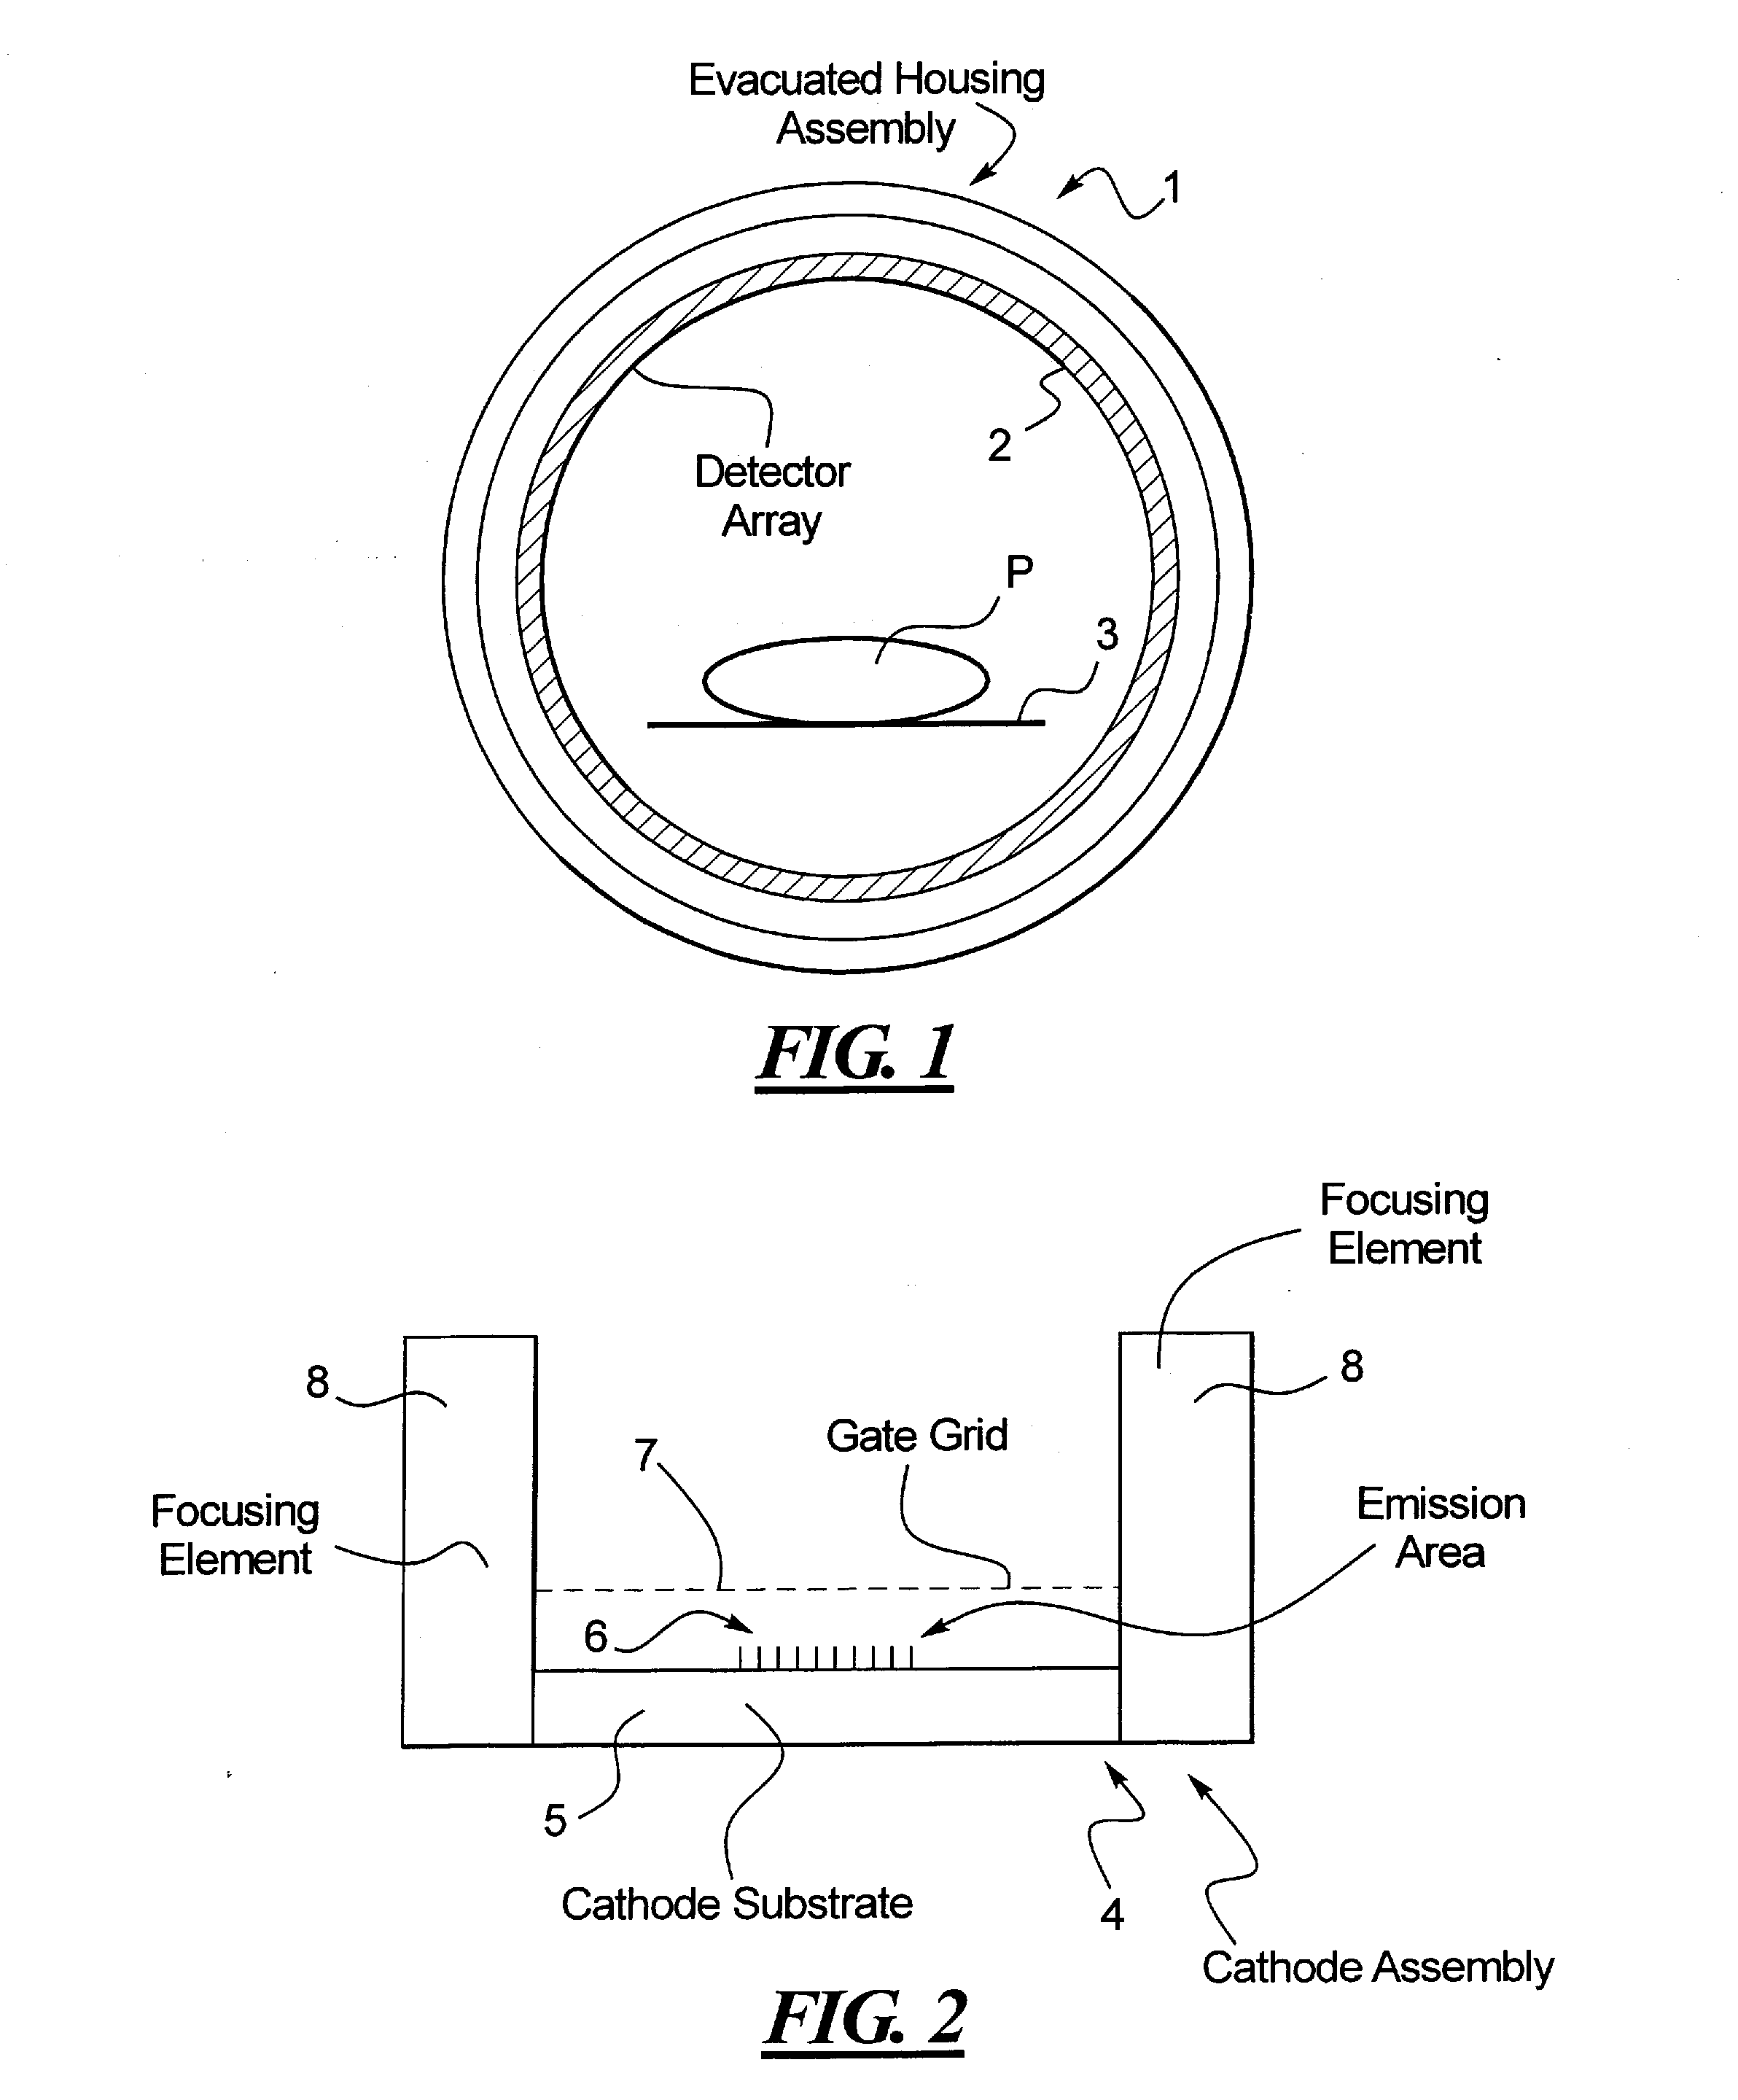 Field emission x-ray source with magnetic focal spot screening